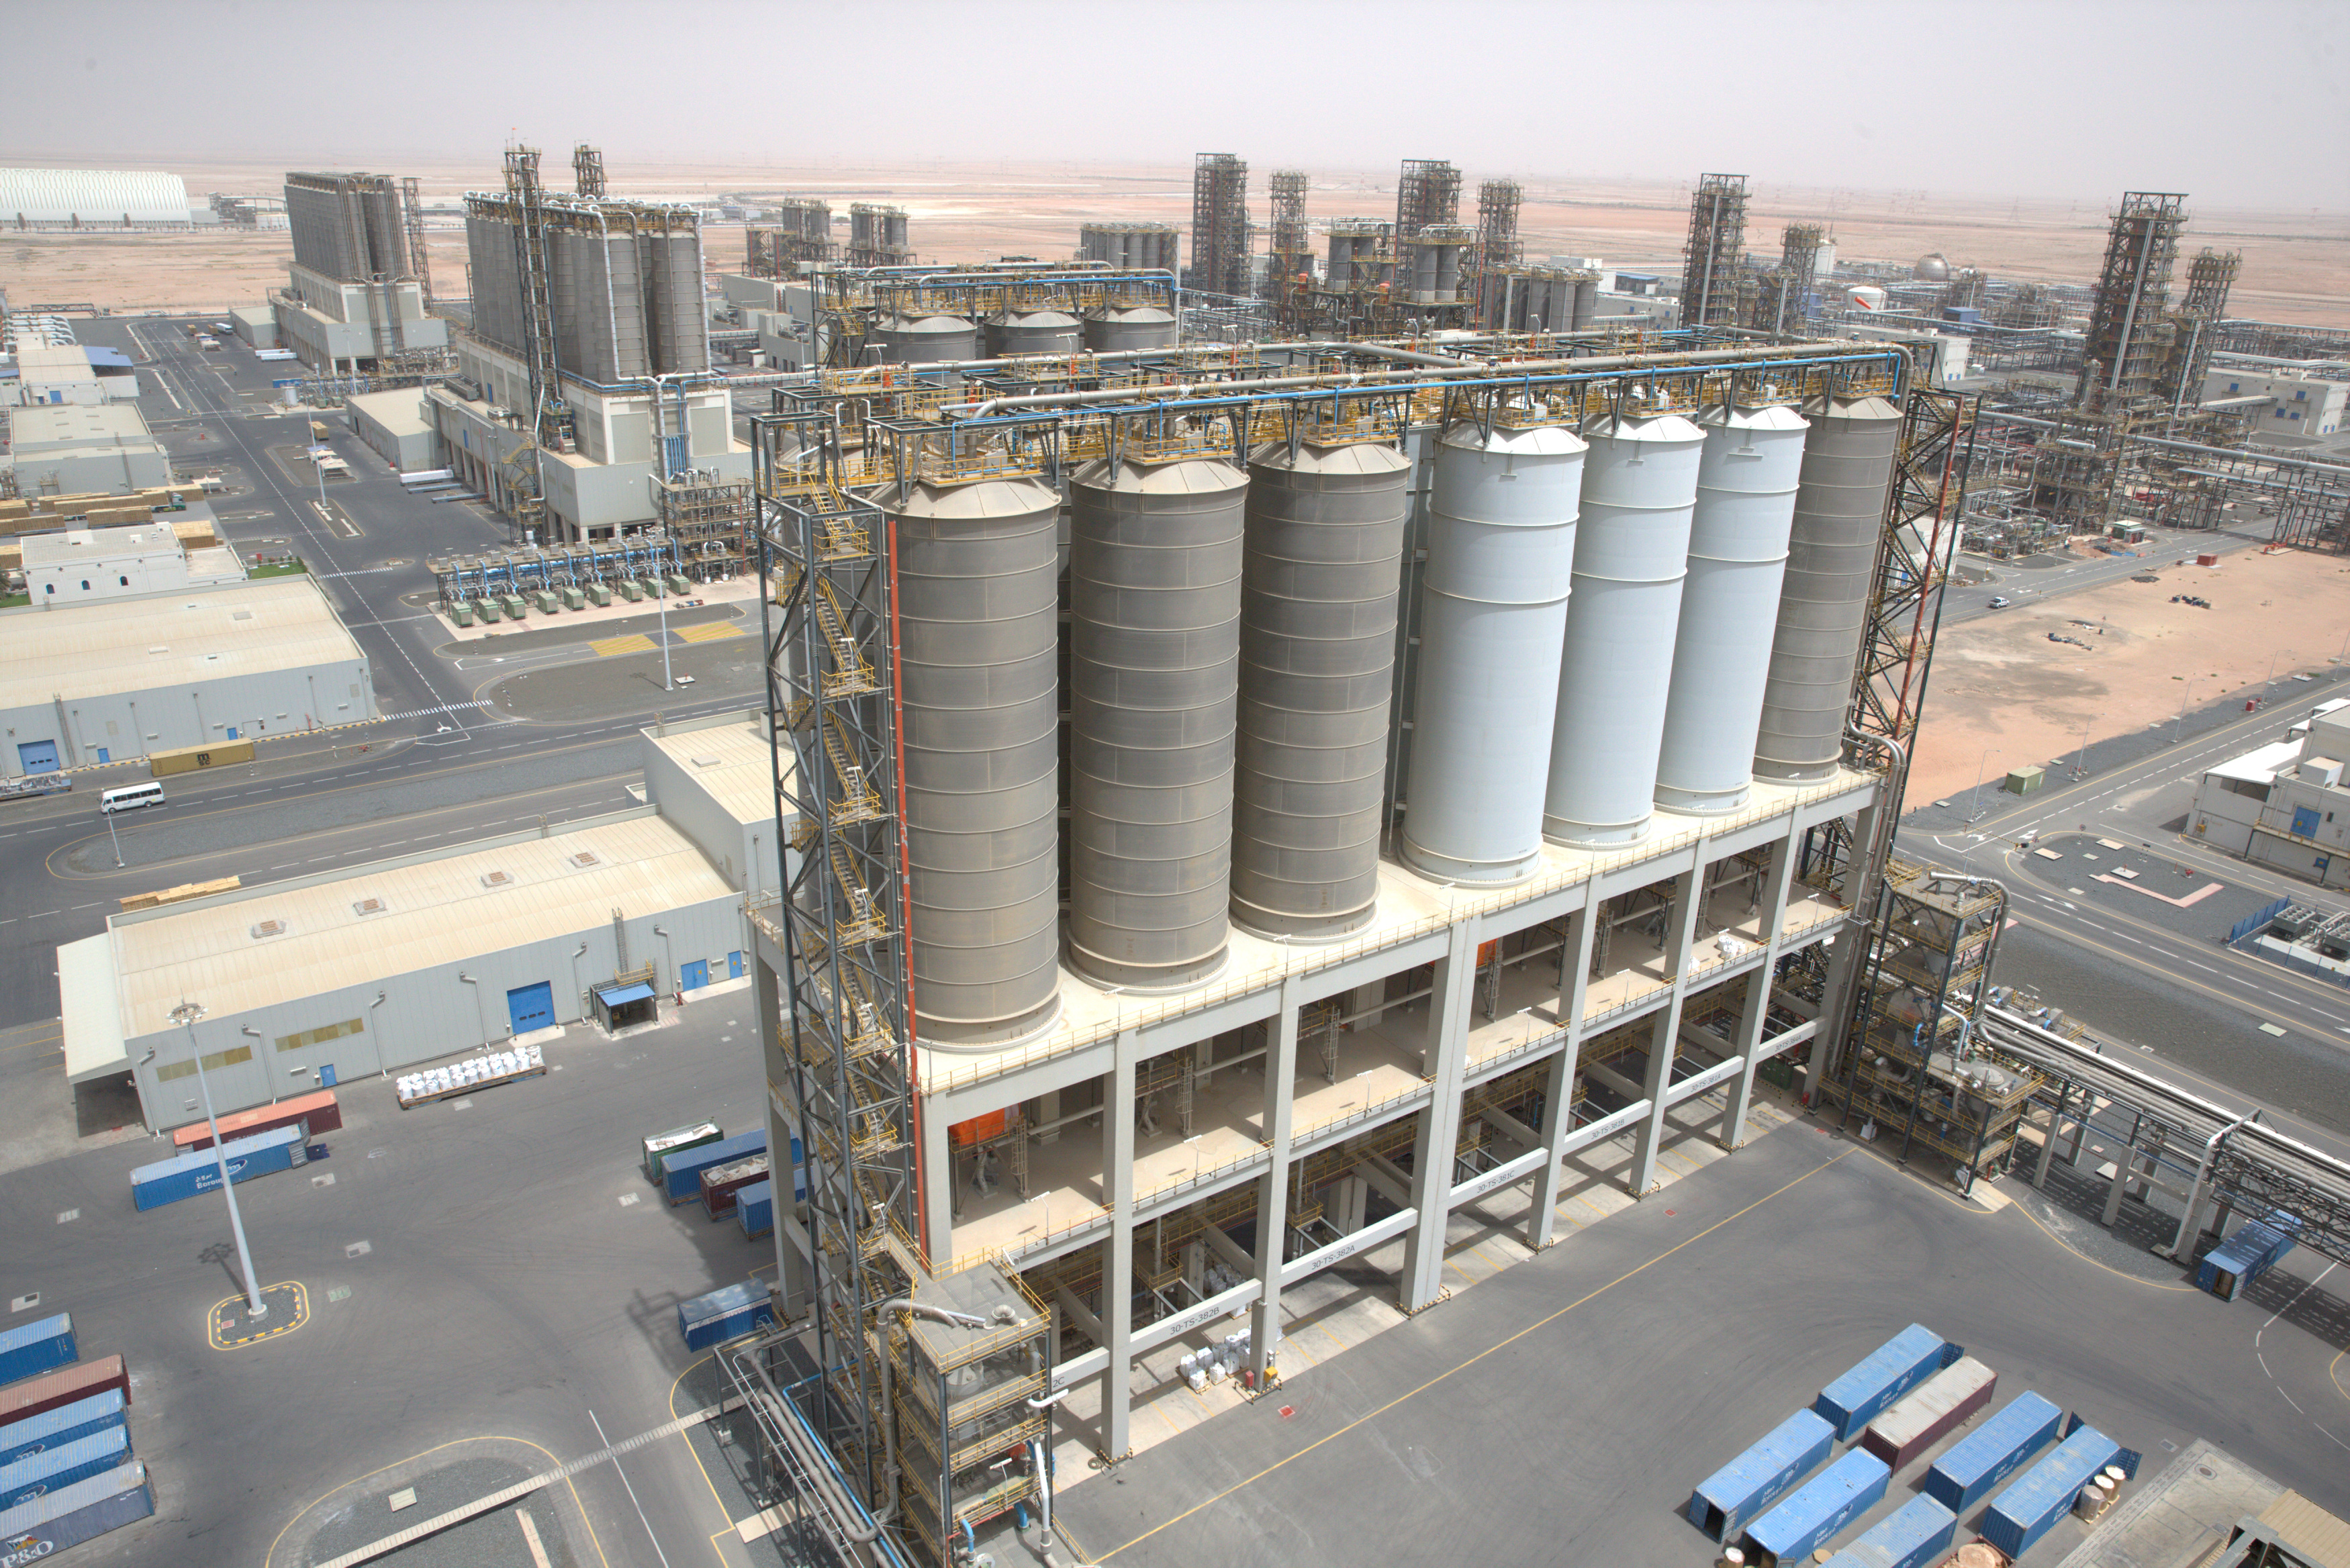 General view of the Borouge petrochemical facility at ADNOC's Ruwais Industrial Complex in Ruwais